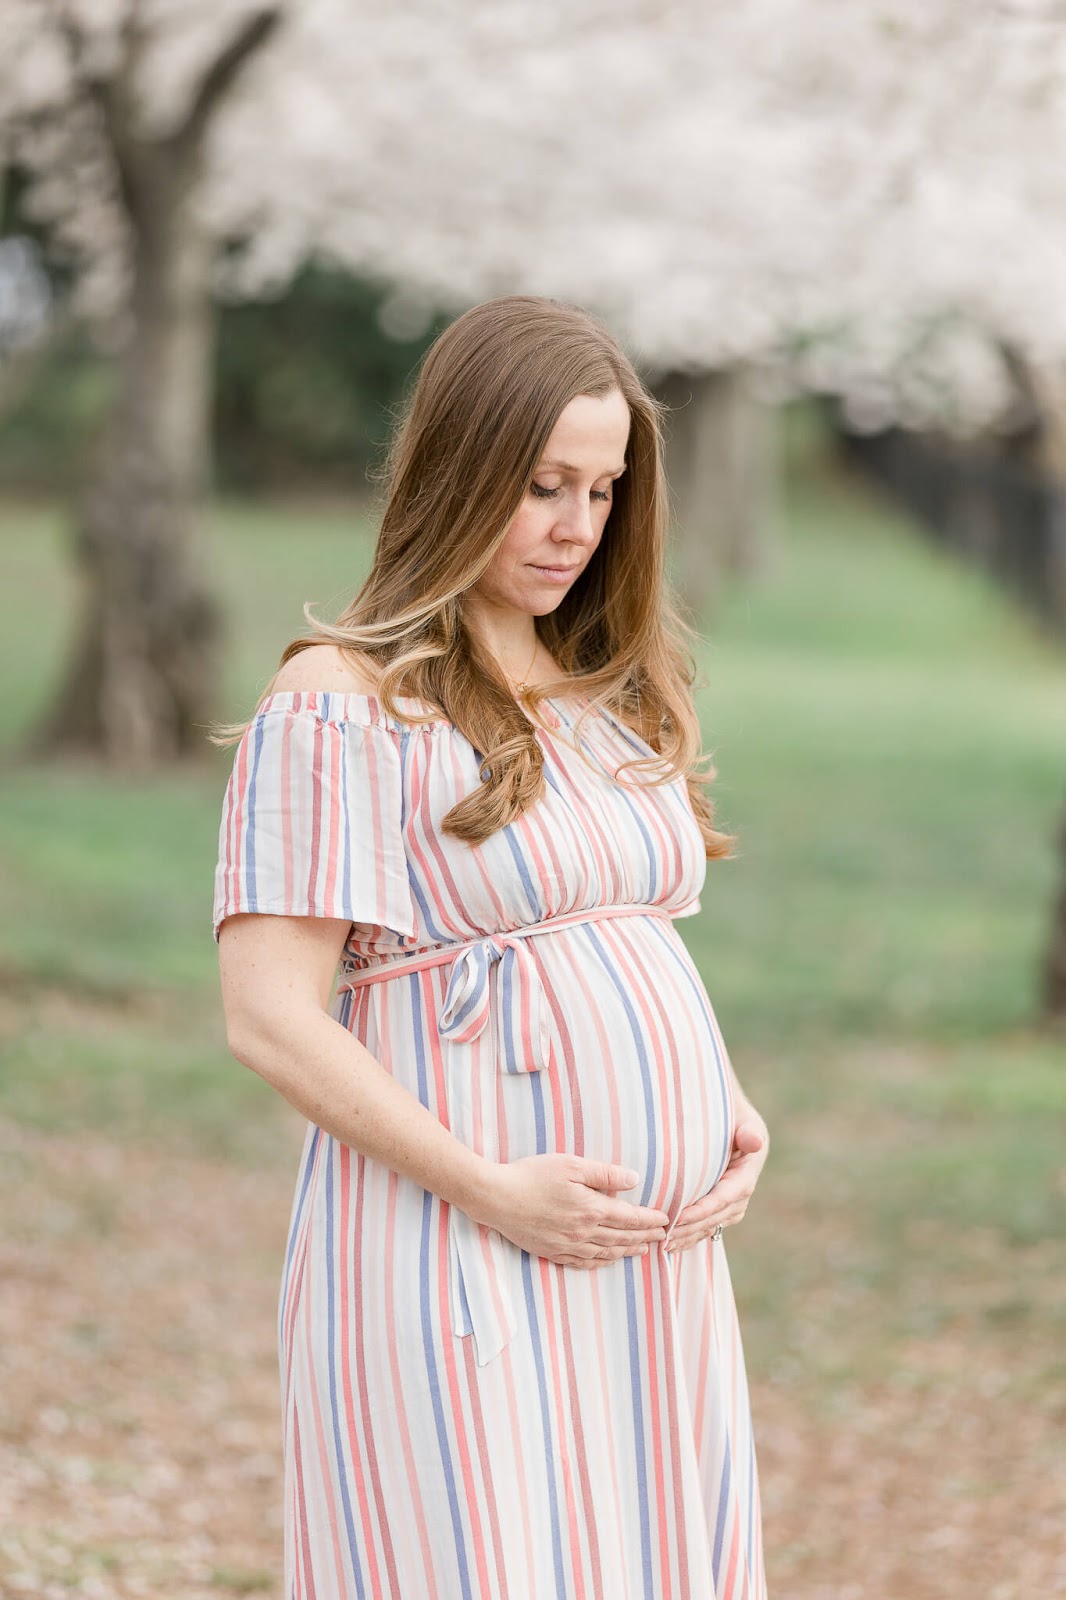 Pregnant woman solo photoshoot in a park